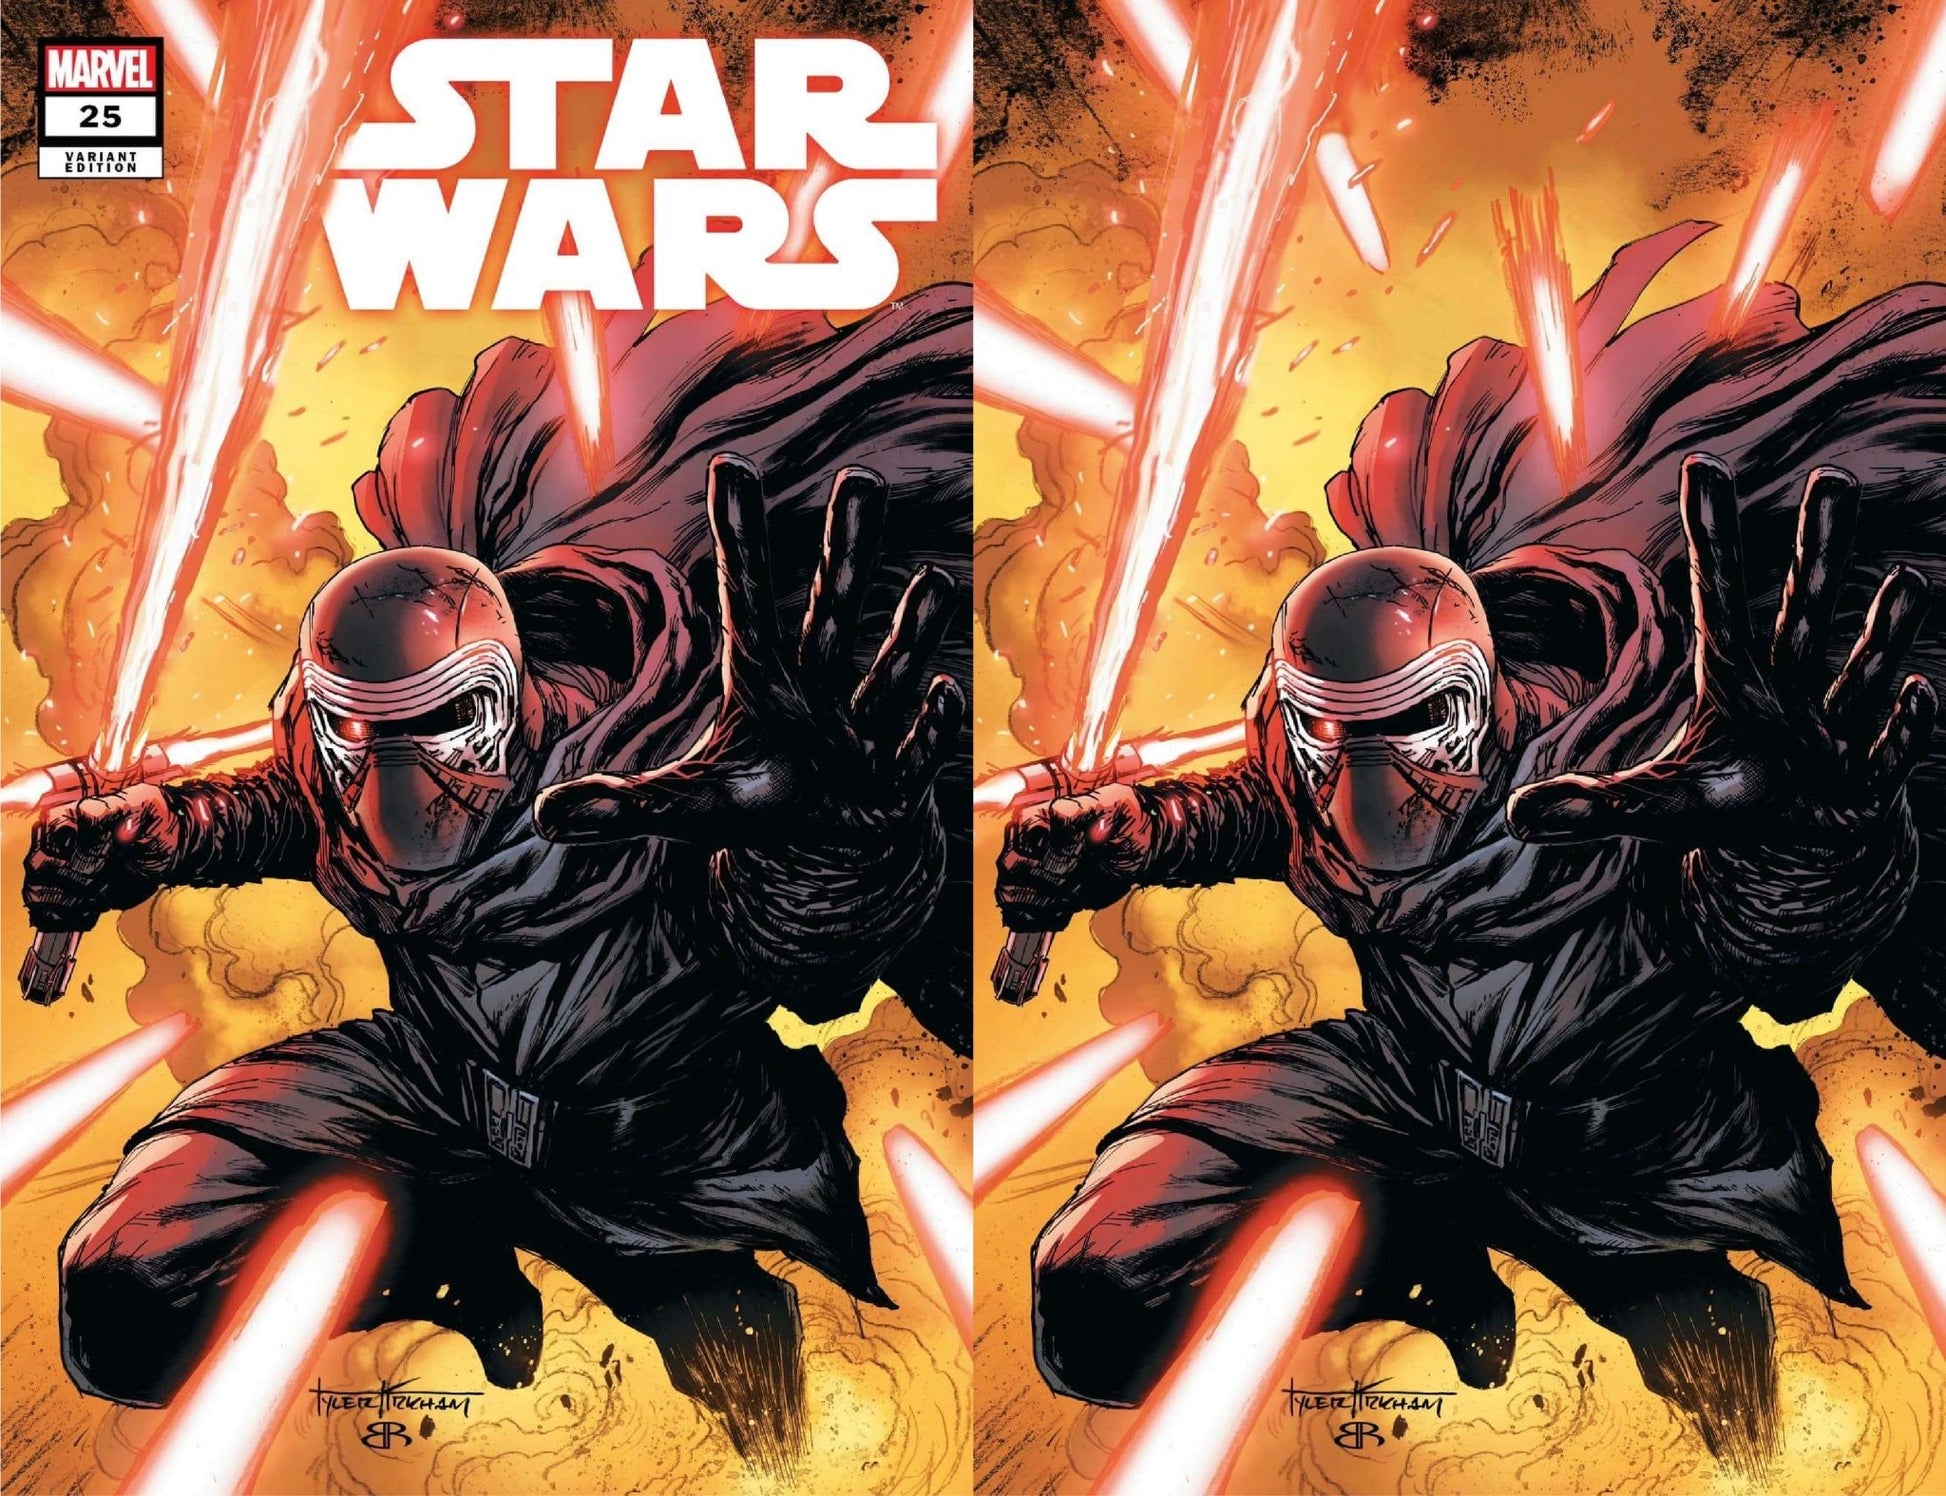 STAR WARS #25 - TYLER KIRKHAM EXCLUSIVE COVER - The Comic Construct